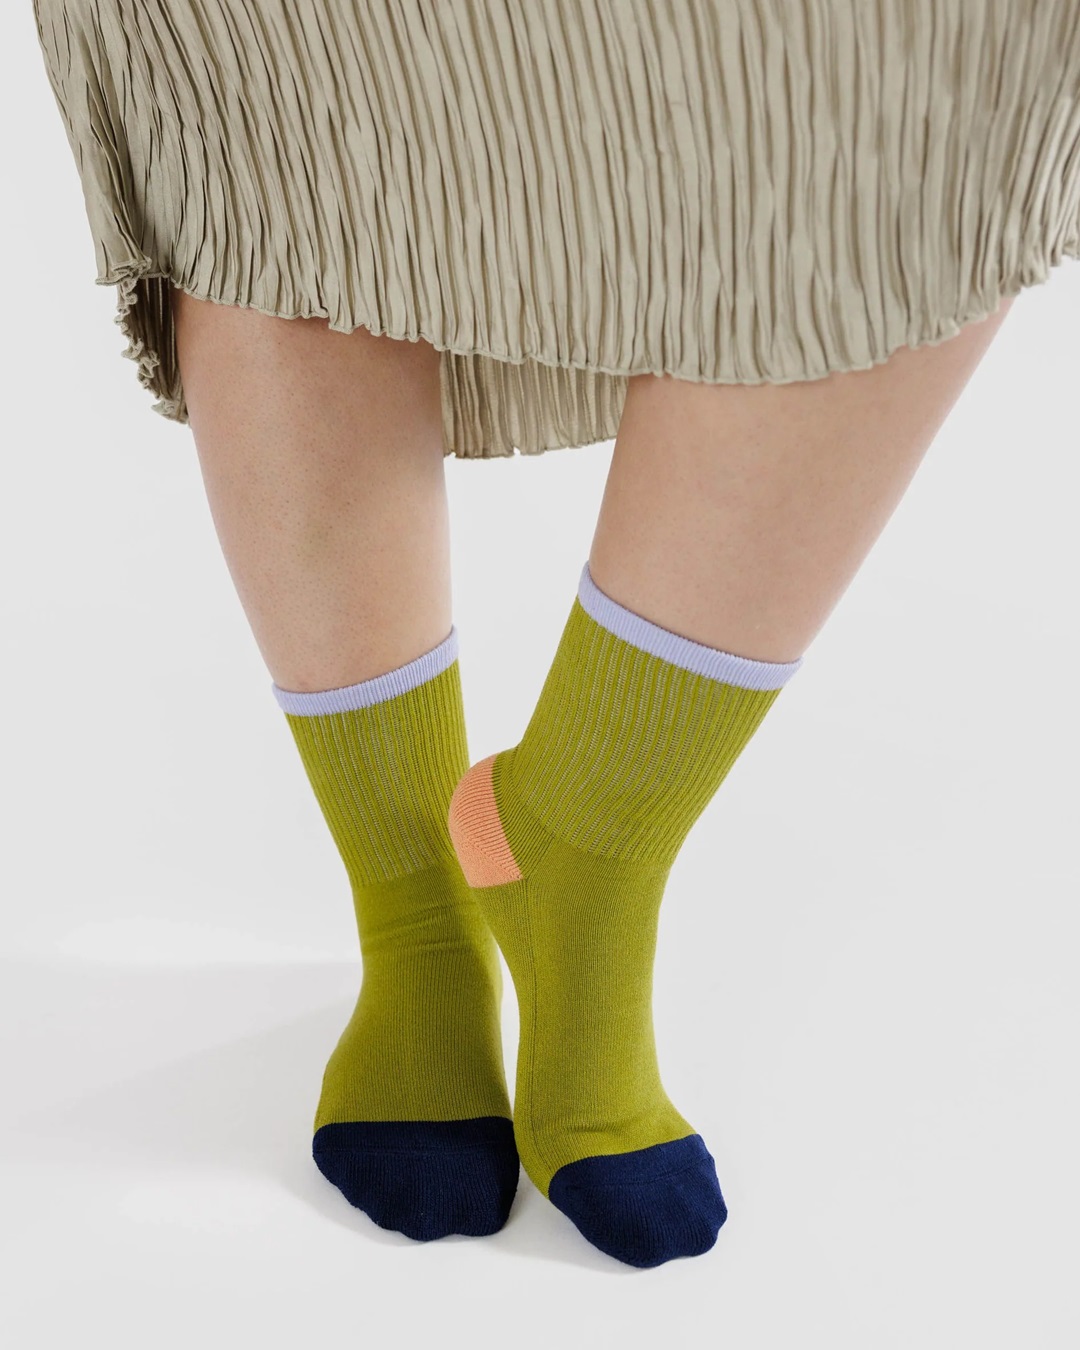 Lemongrass pair of socks of feet with navy blue coloured toes and orange heels